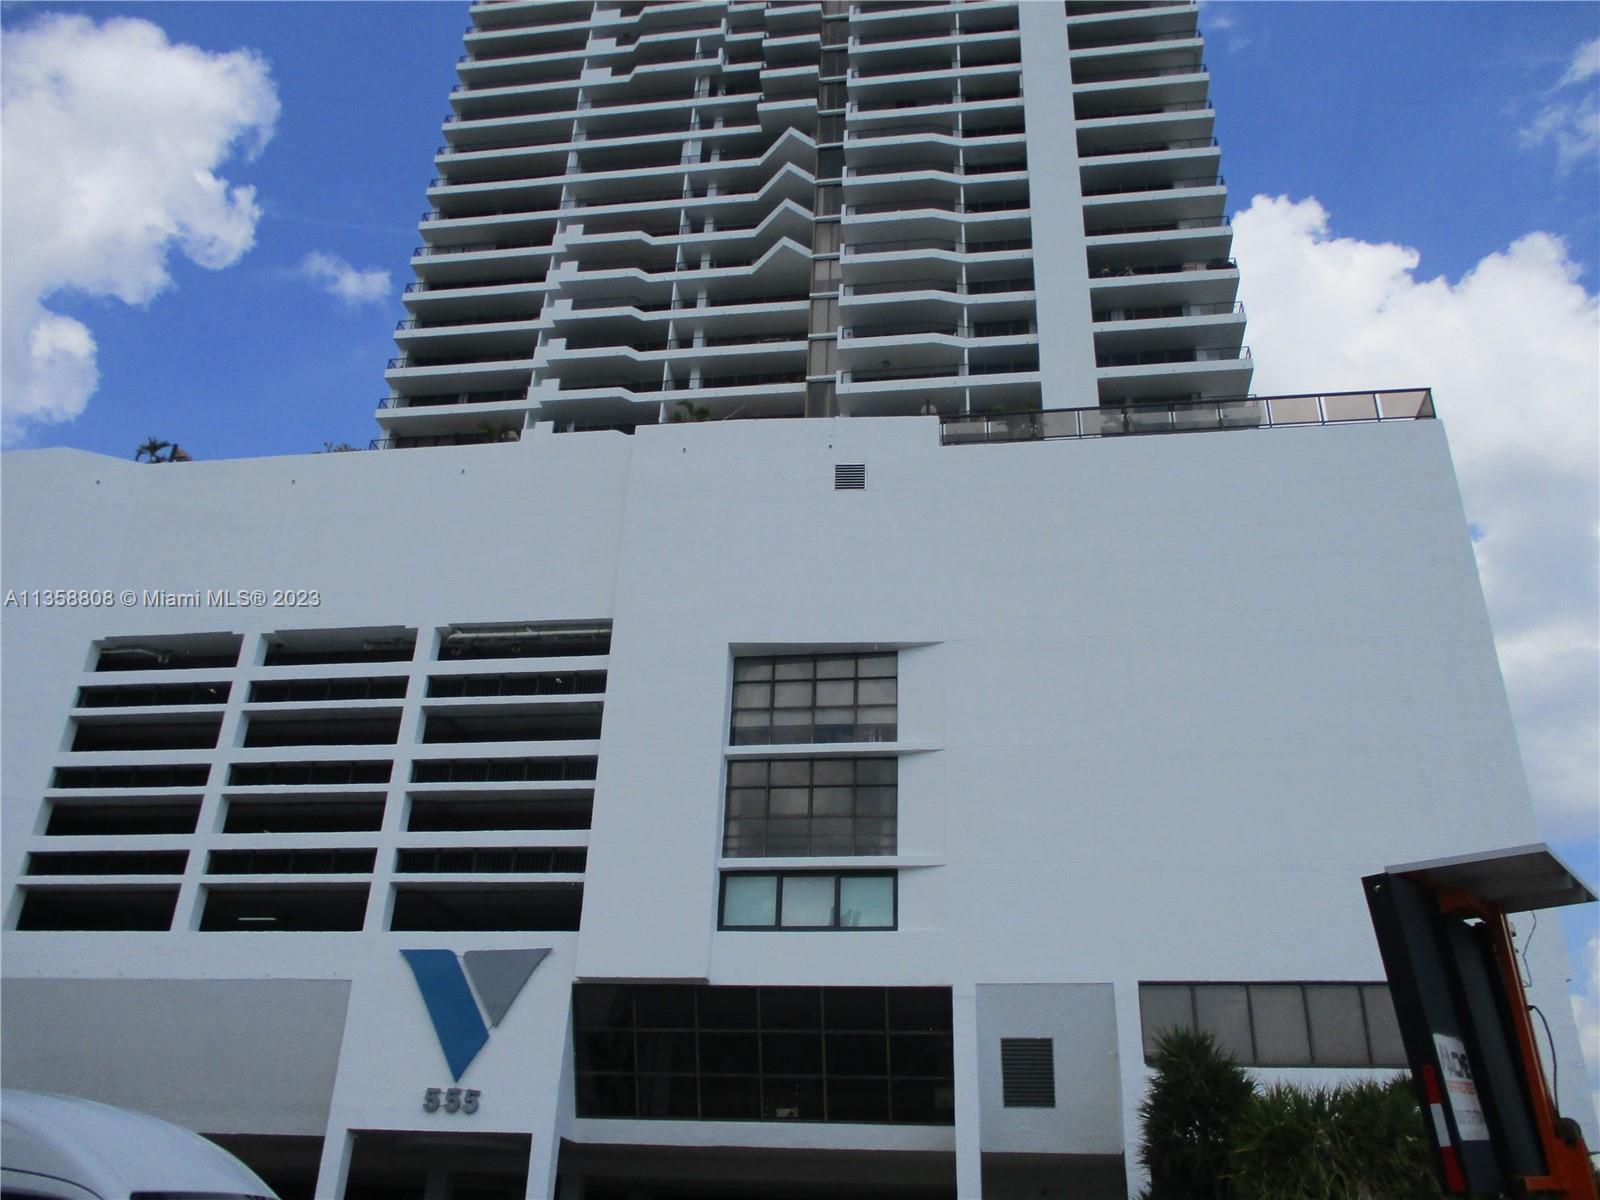 Pie in the Sky, this 1/1.5 unit is on the 29th fl on the South side of the Venetia. The SE view from